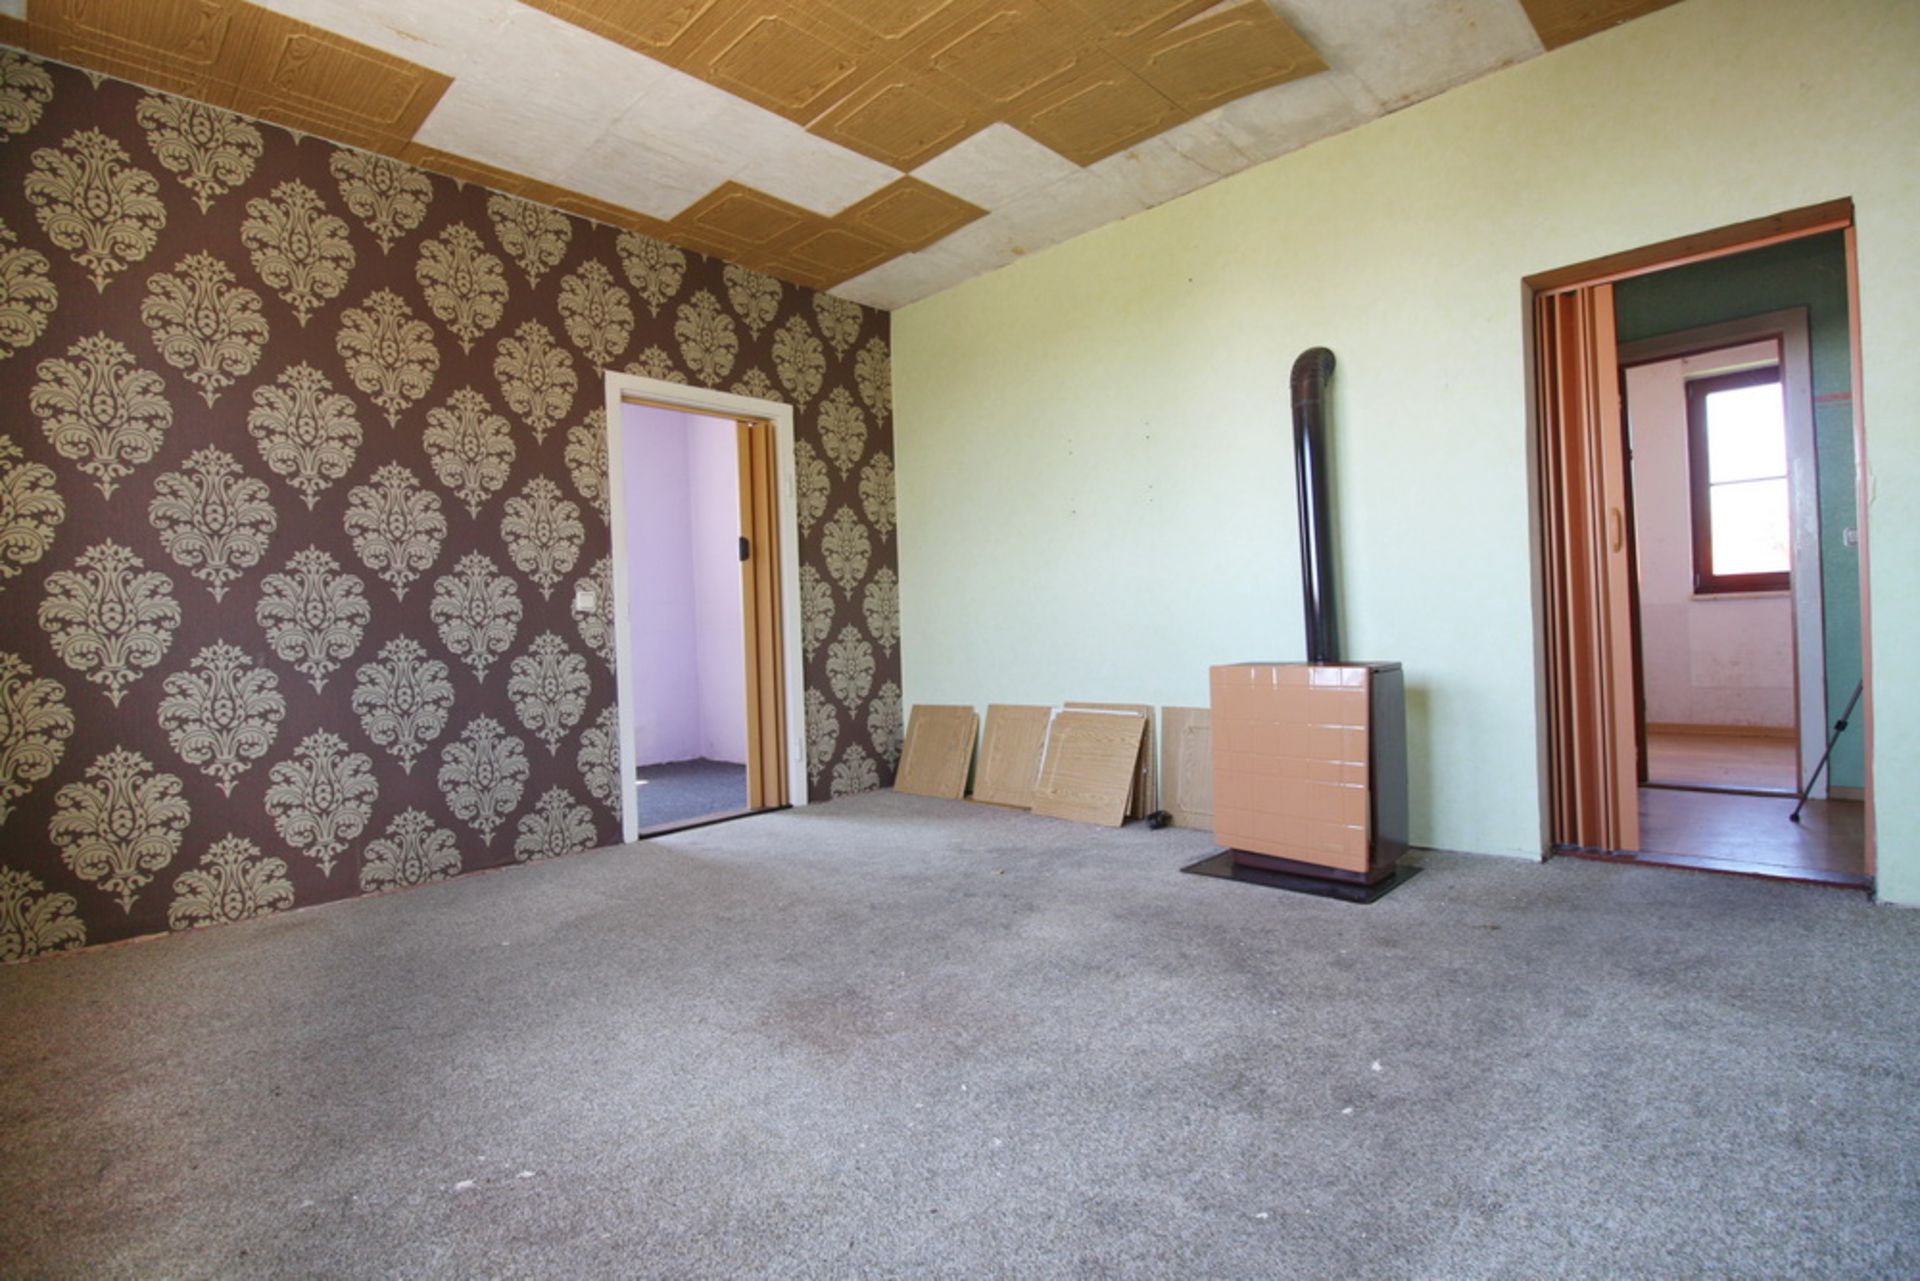 LARGE HOUSING BLOCK HORNSOMMEM, GERMANY READY TO MOVE INTO FREEHOLD VACANT POSSESSION - Image 43 of 91